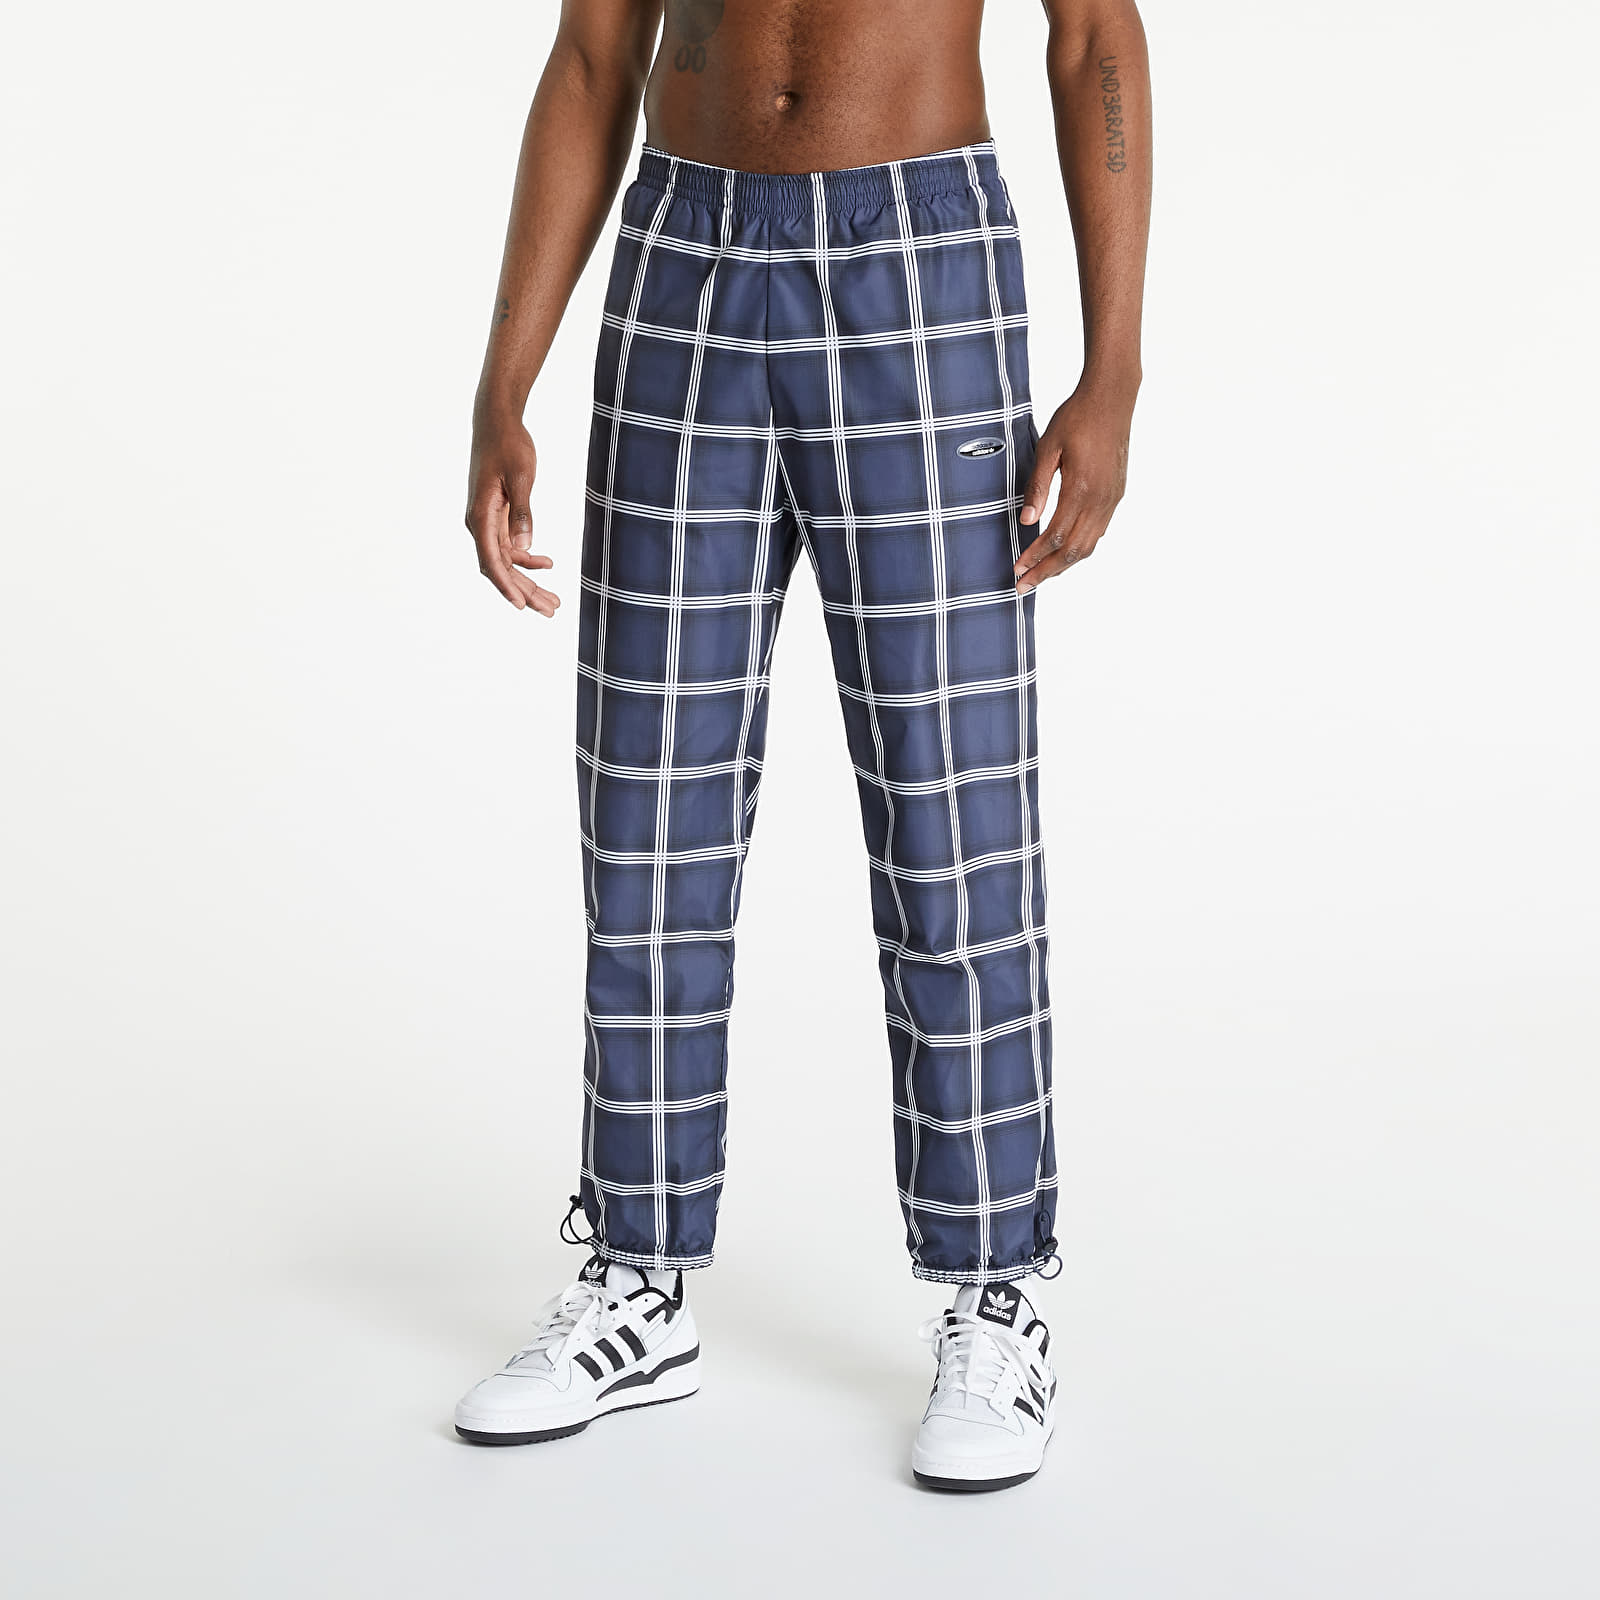 Pants and jeans adidas Originals Q2 Track Pant Navy/ White